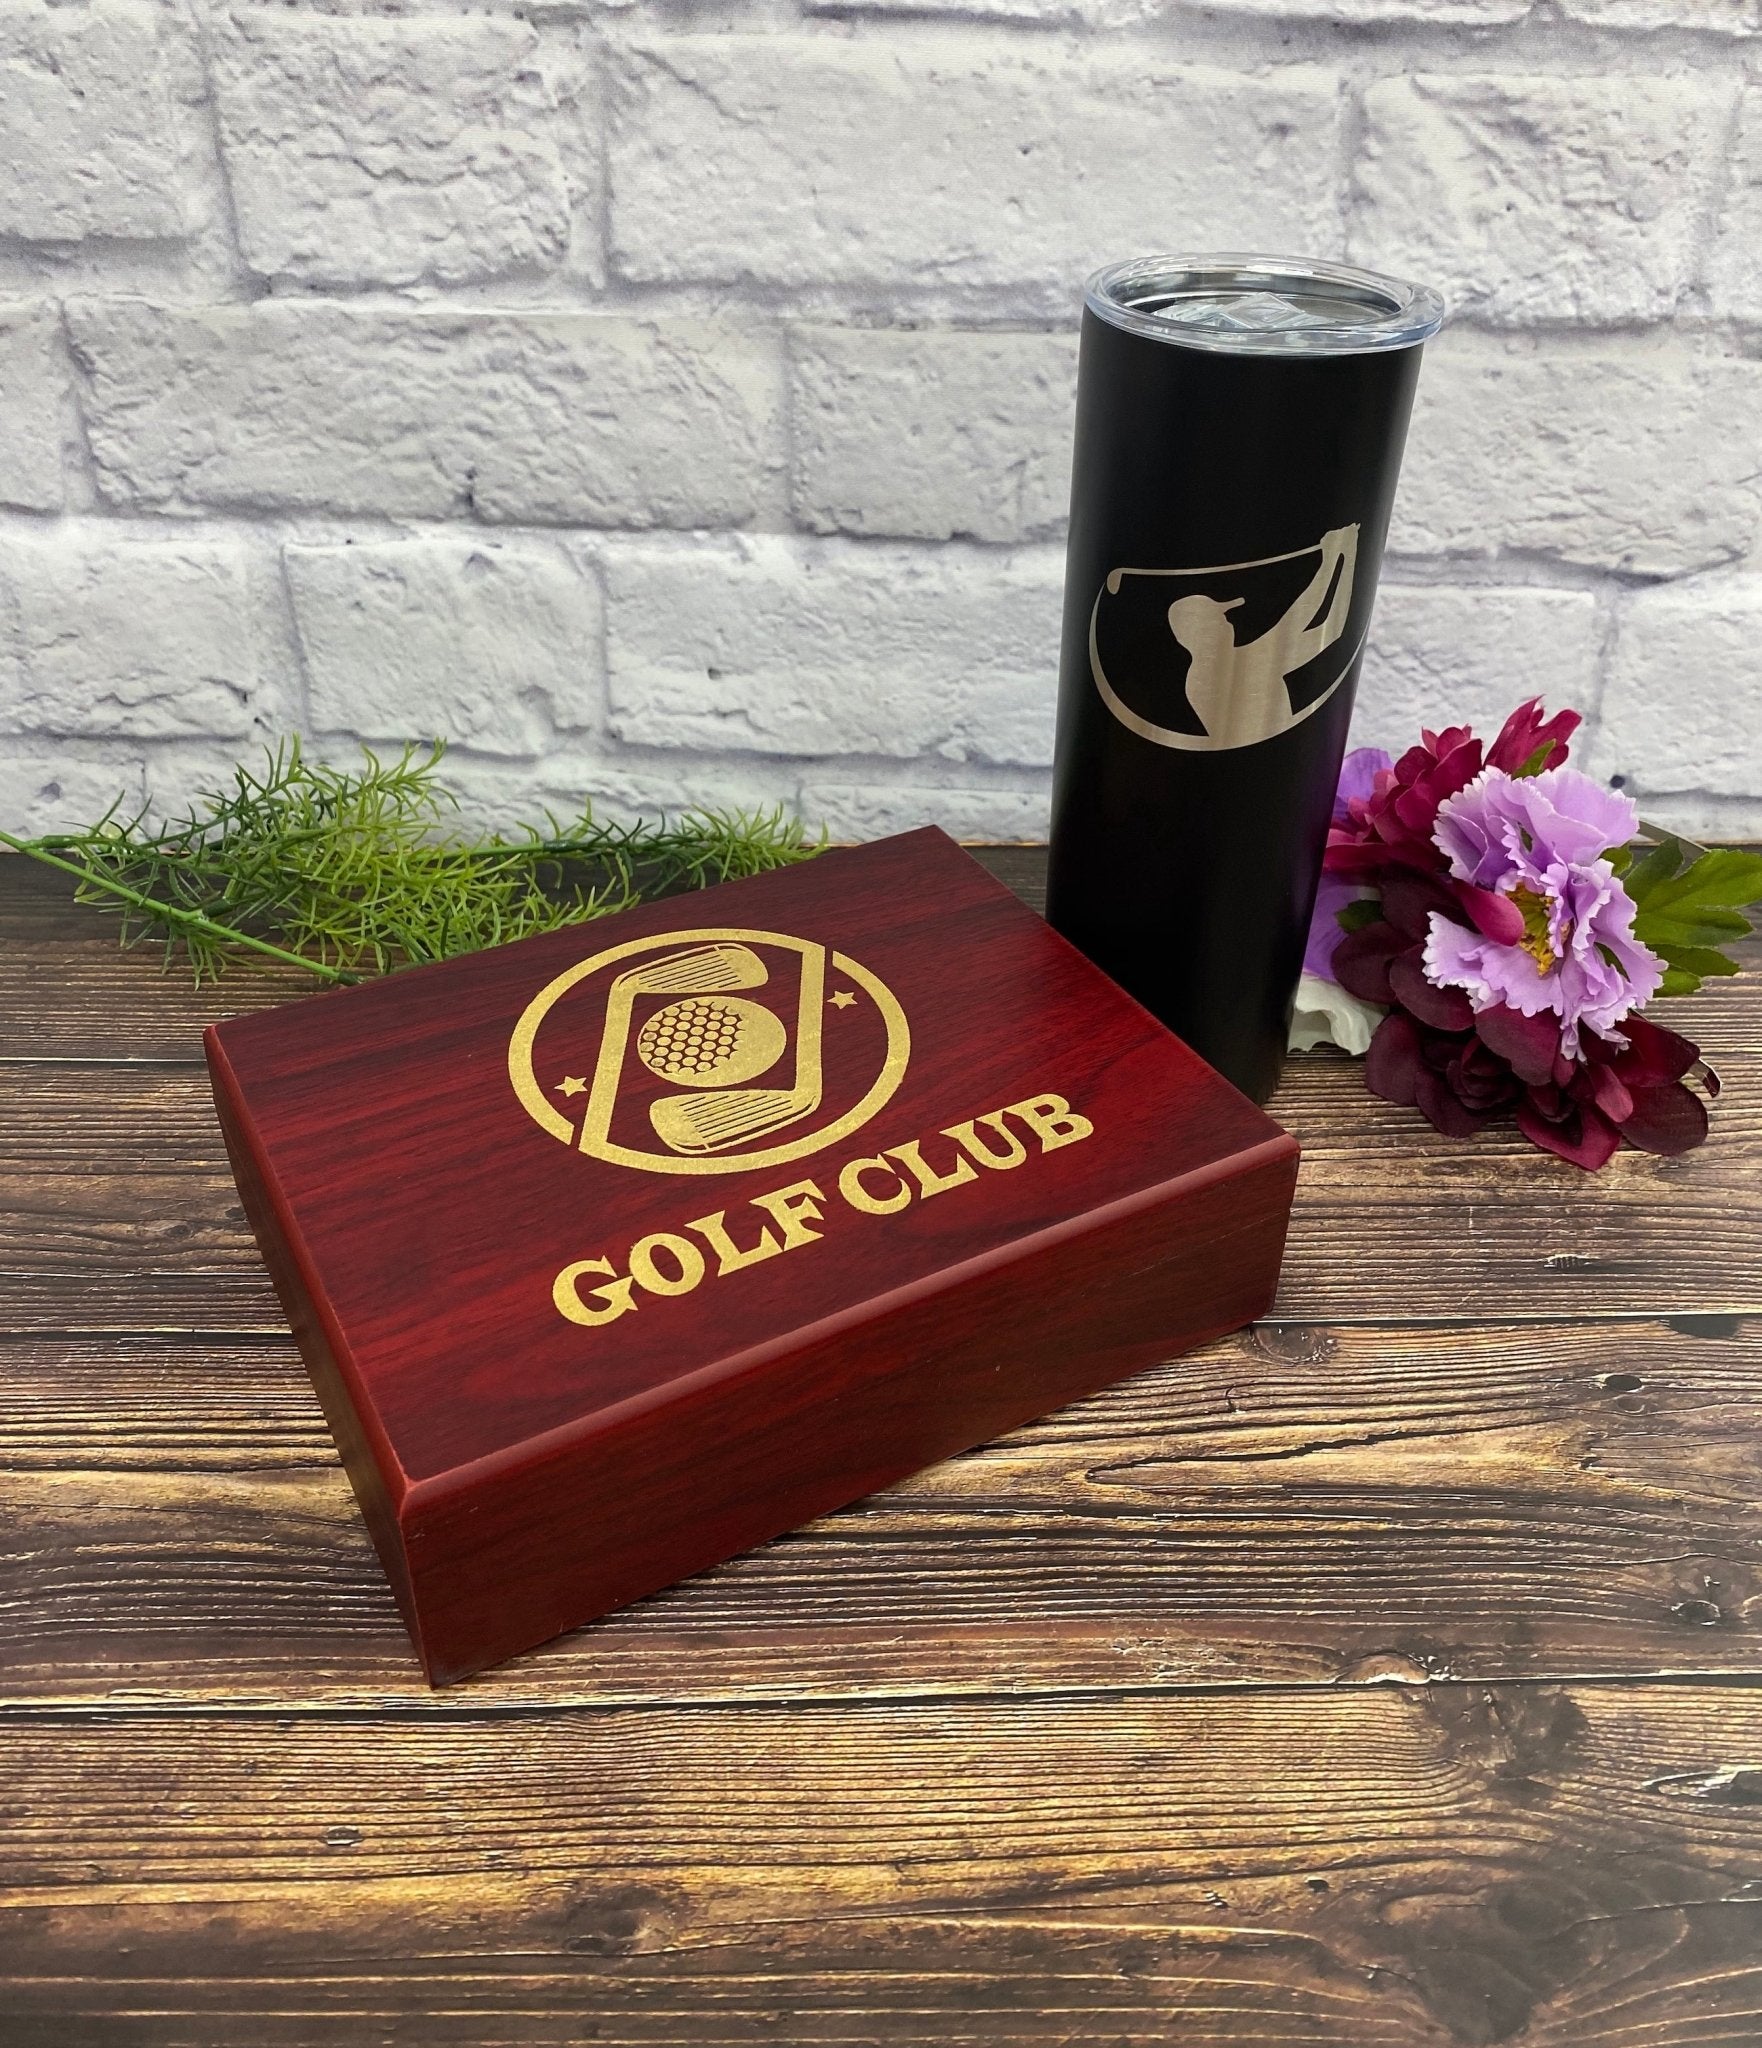 Personalized Golf Balls Box Gift for Birthday Wedding, Gift for Dad Husband Wife